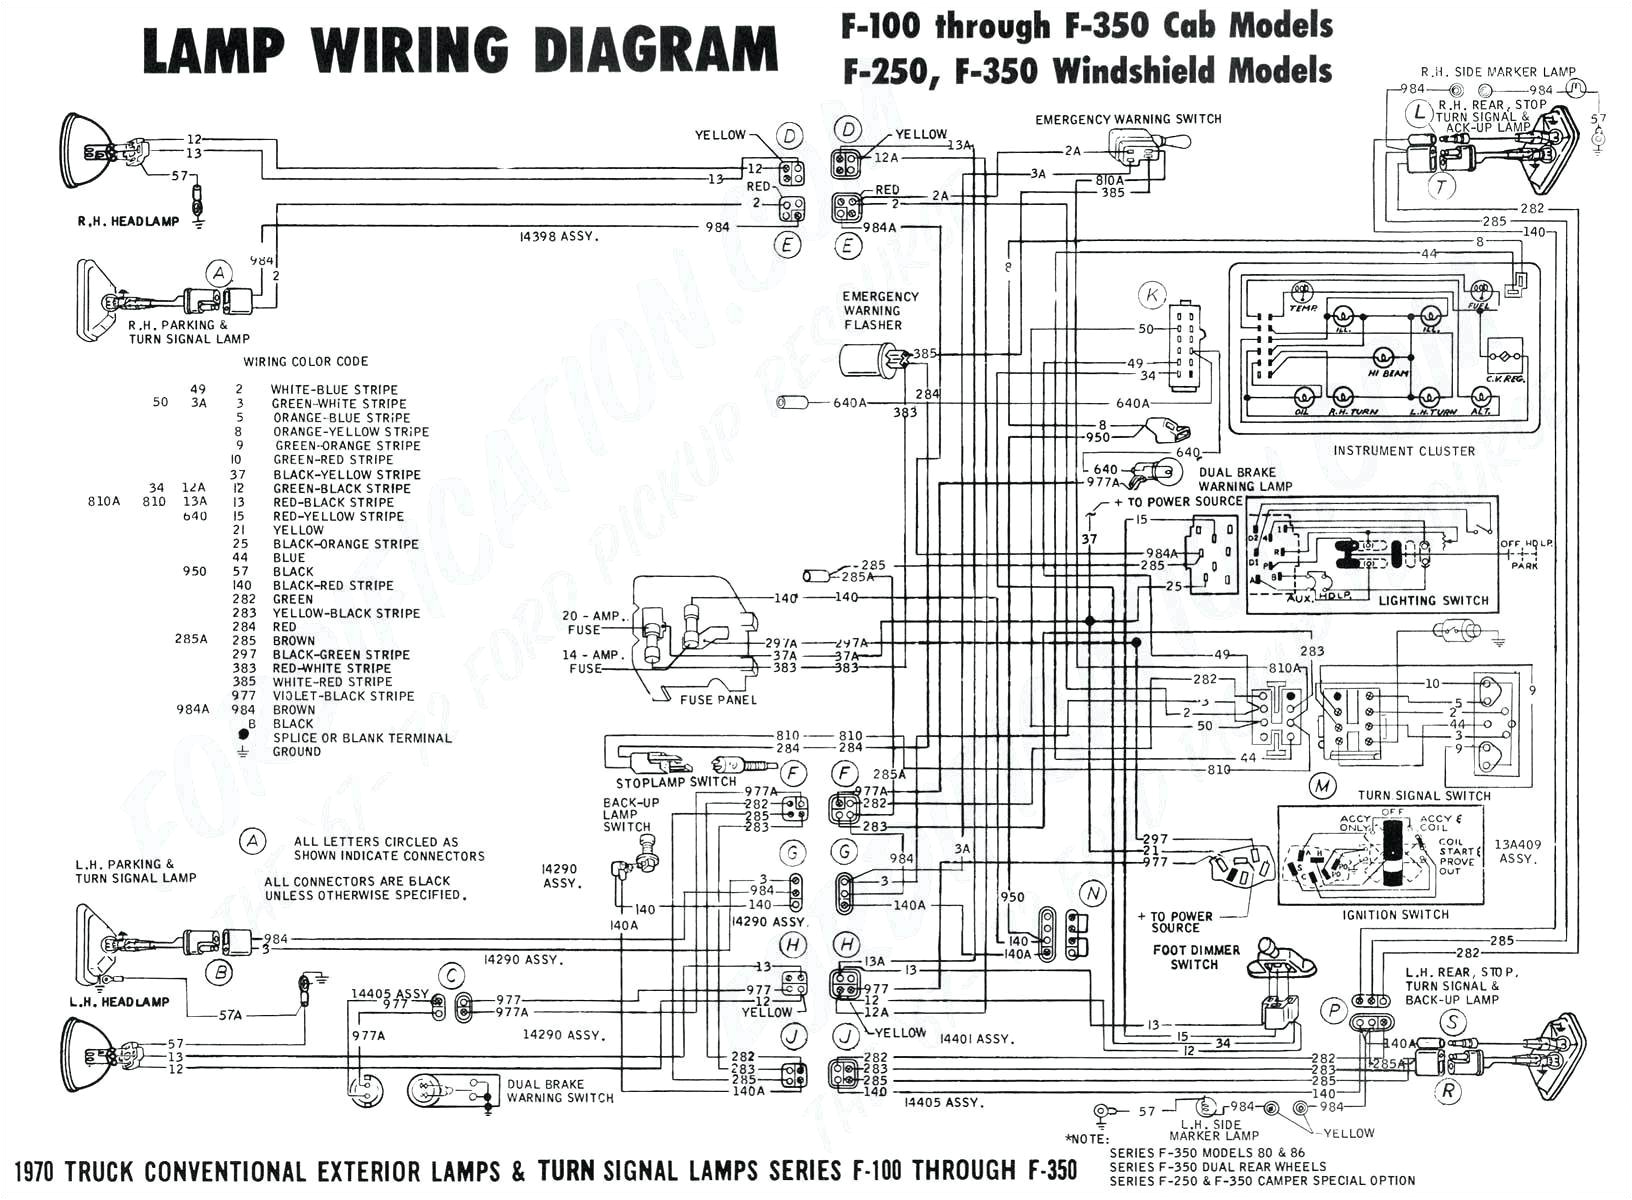 1986 Chevy C10 Headlight Wiring Diagram We 7188 1986 Chevy Truck Wiring Diagram Furthermore Dodge